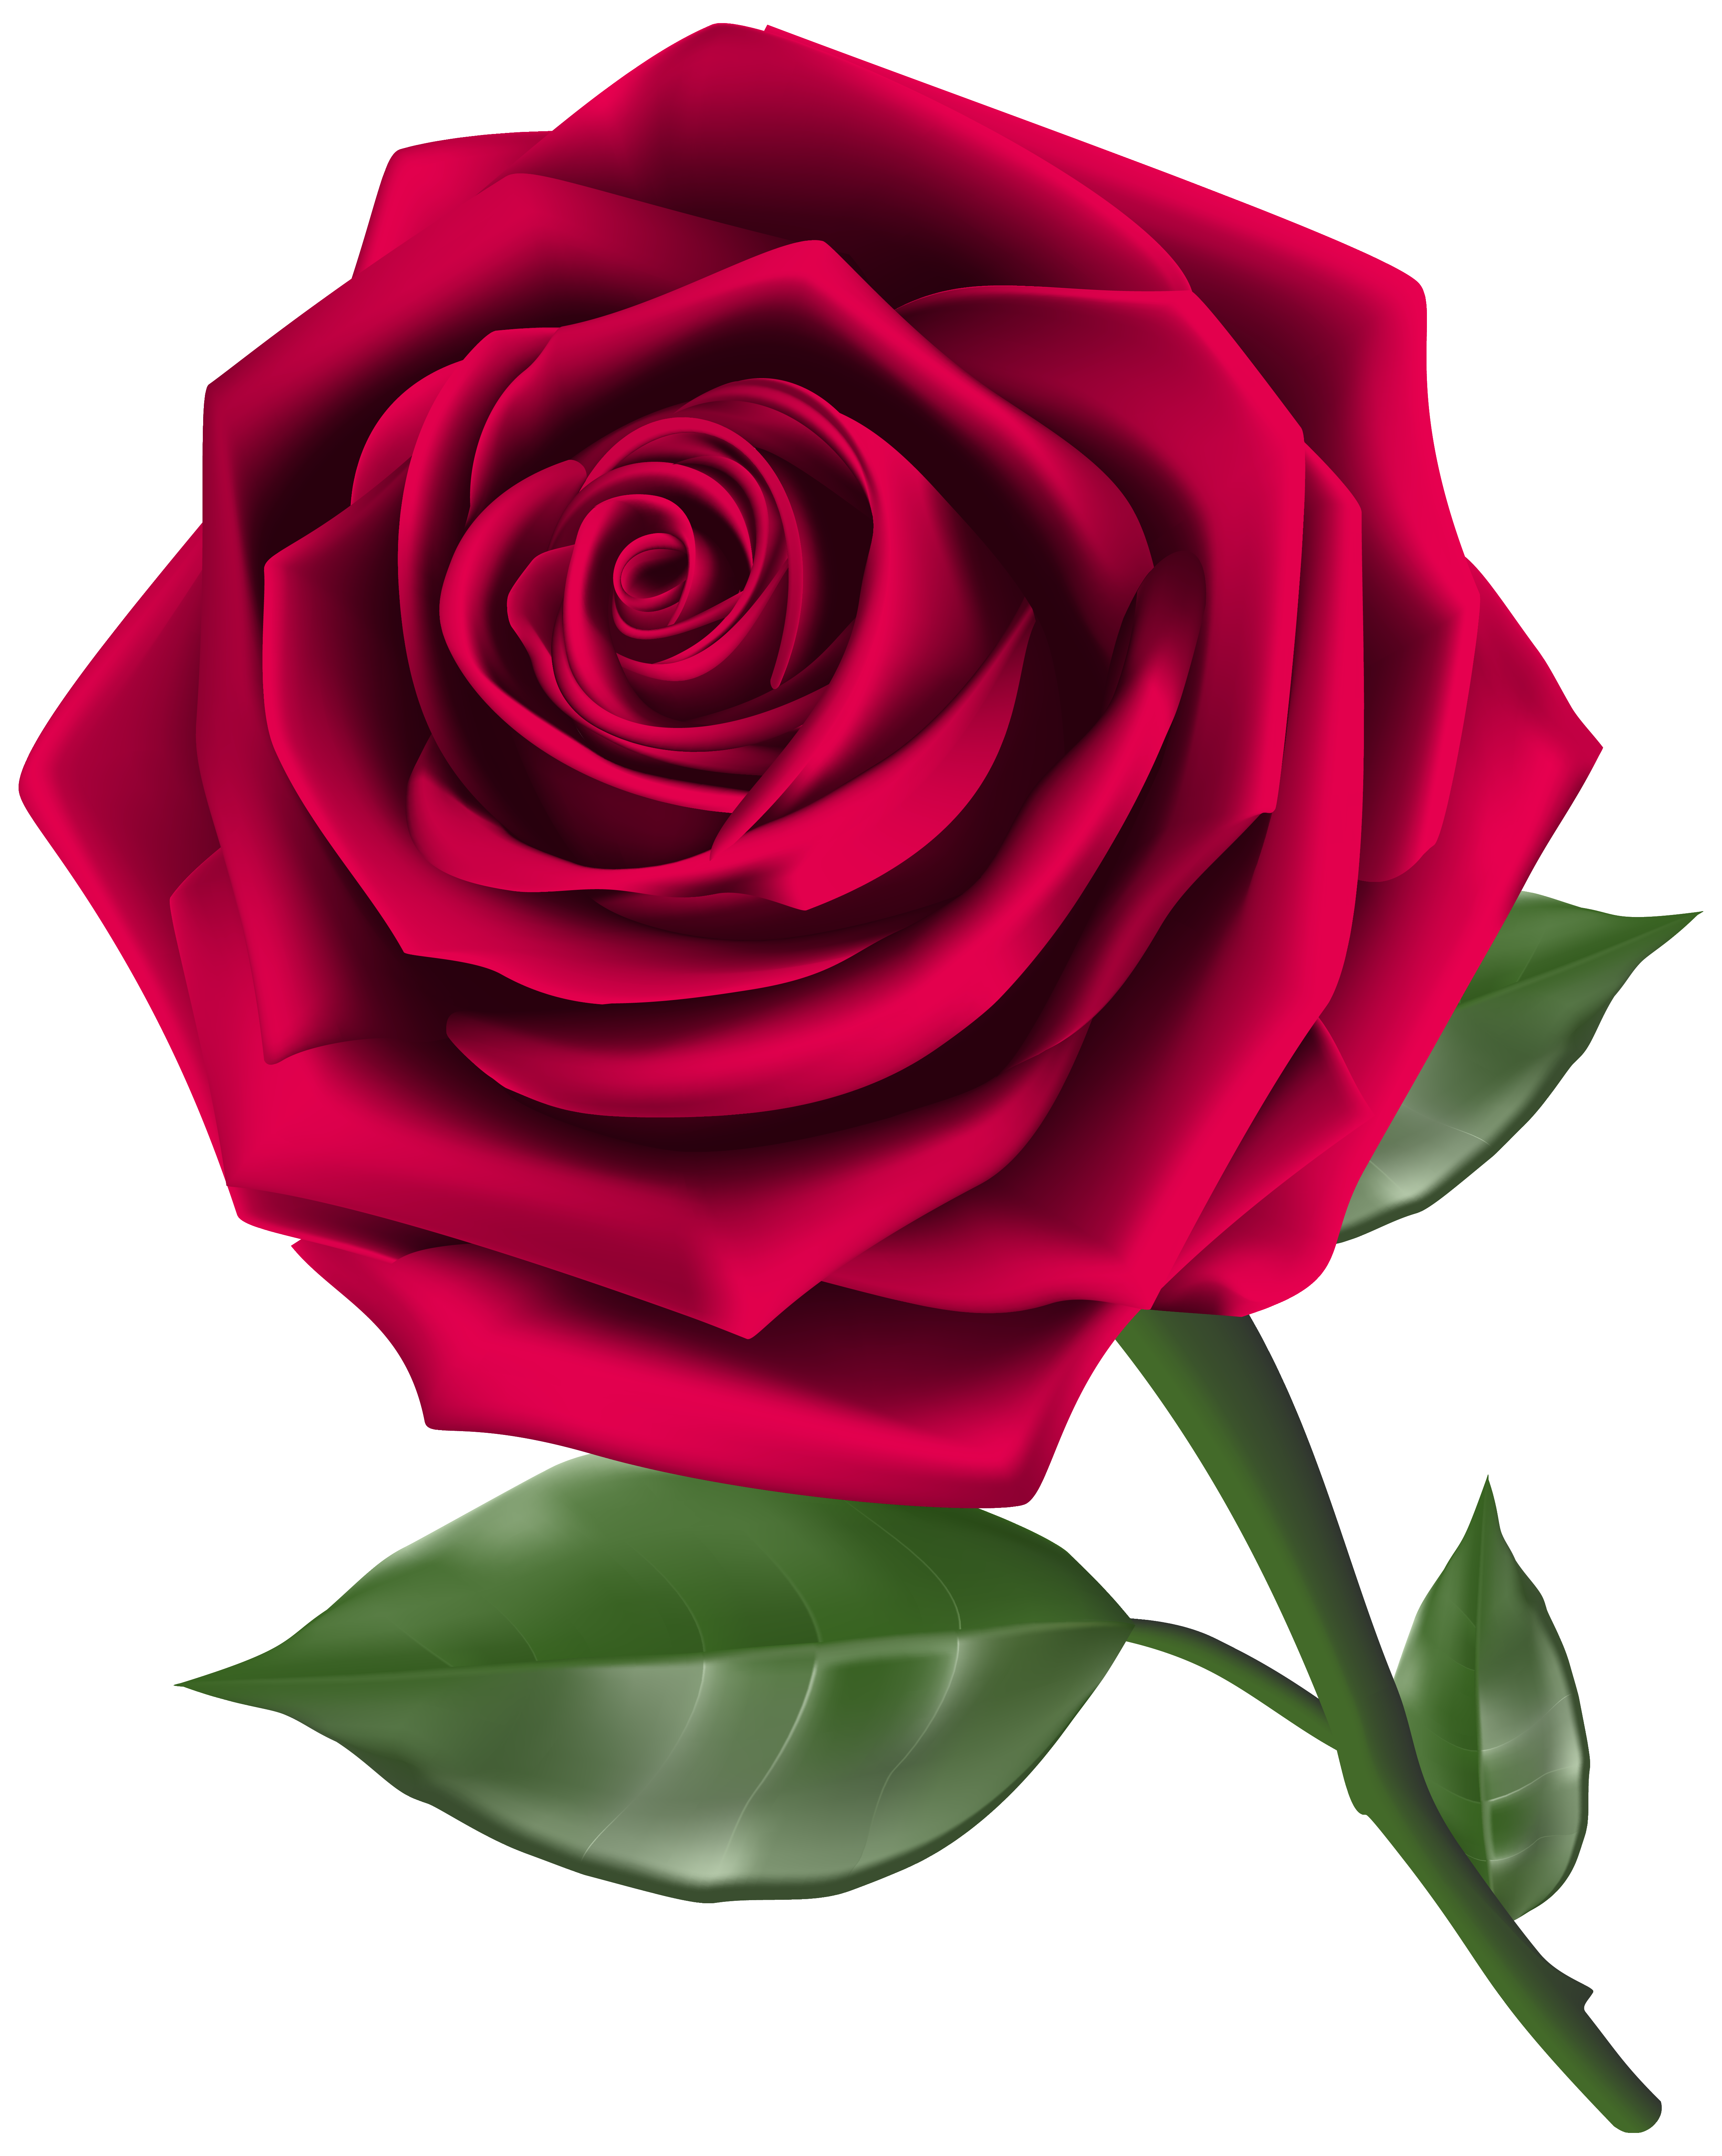 Steam rose png image. Clipart roses shape